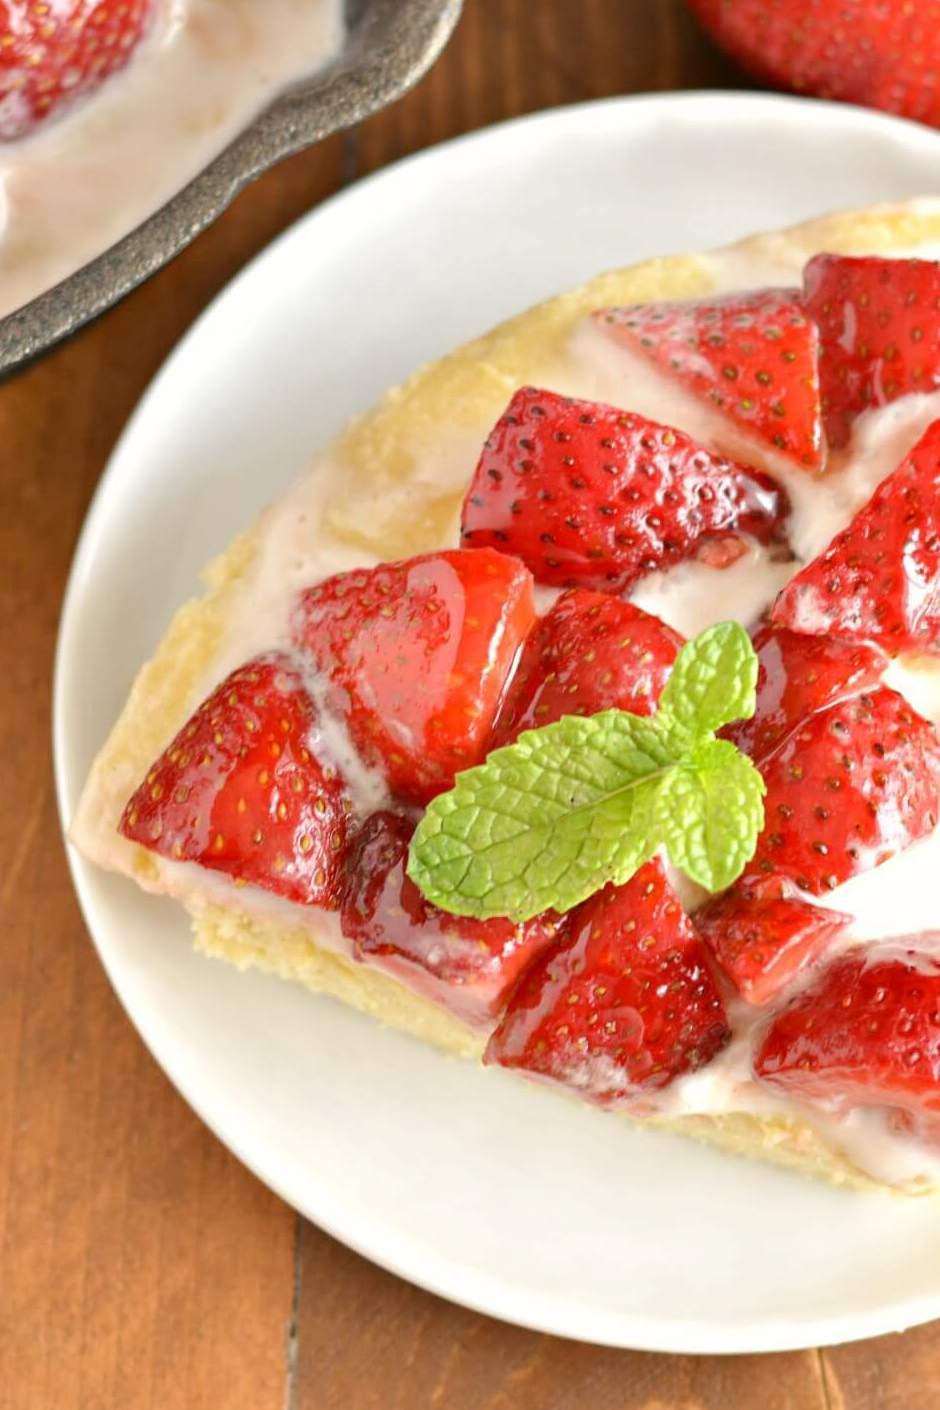 COCONUT FLOUR Strawberry Shortcake Prep Time: 15 minutes Cook Time: 20 minutes Yield: 8-10 For the Shortcake: ½ cup coconut flour 3 eggs ¼ cup melted coconut oil ¼ cup maple syrup (or sweetener of